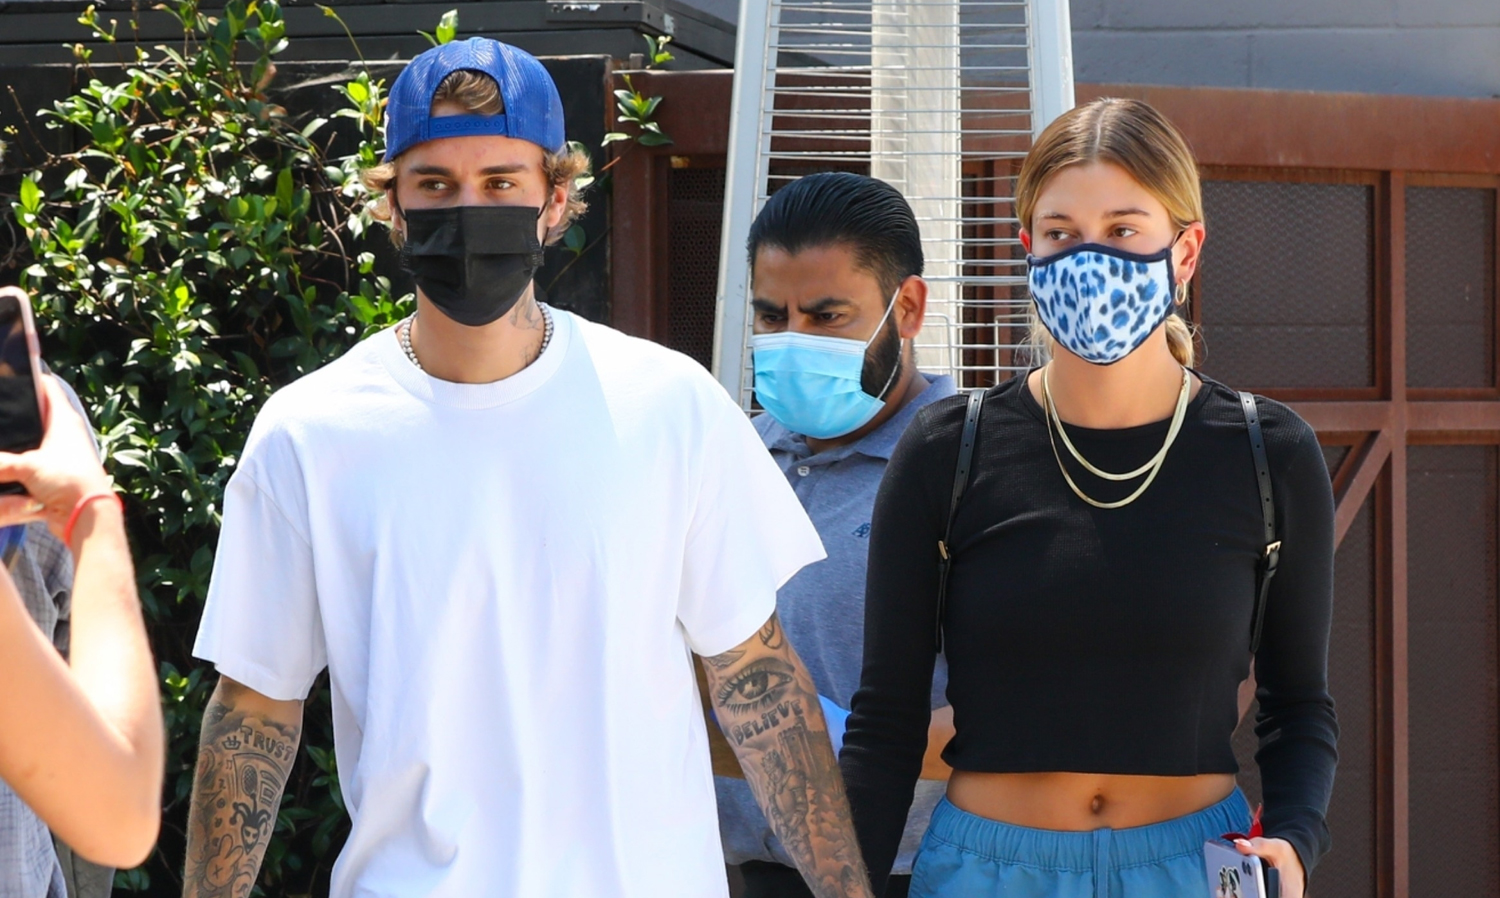 Justin Beiber and Hailey Bieber together since 2015